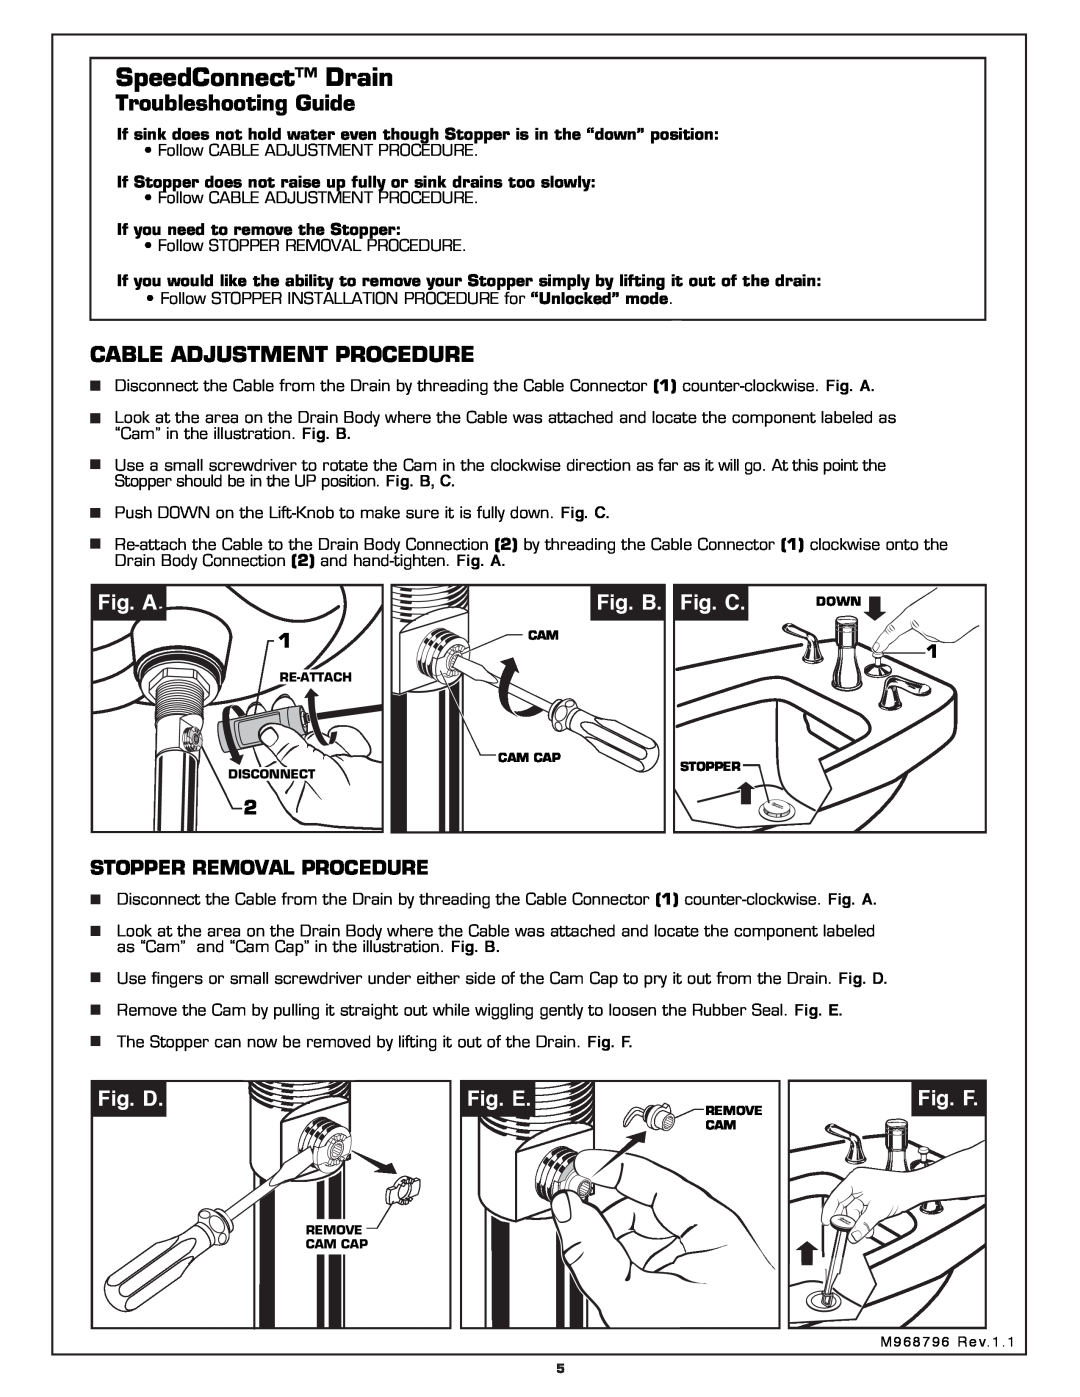 American Standard 3475.5 SpeedConnect Drain, Troubleshooting Guide, Cable Adjustment Procedure, Fig. A, Fig. B, Fig. C 